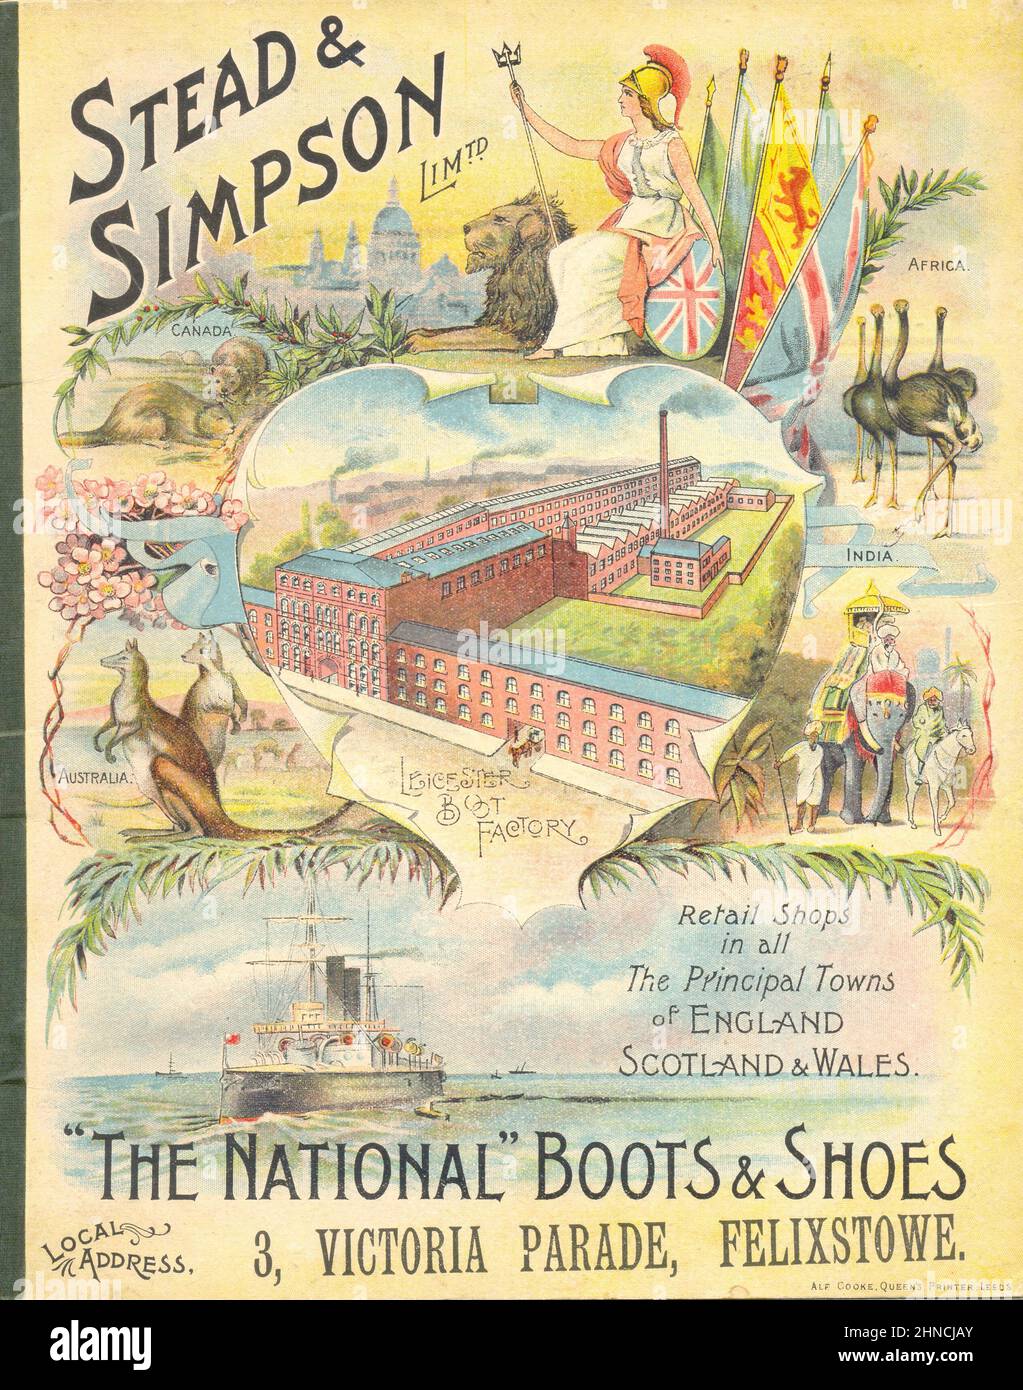 Front cover of advertising calendar blotter for Stead & Simpson Ltd.,  'The  National' Boots & Shoes, 3 Victoria Parade, Felixstowe, Suffolk 1904 Stock Photo